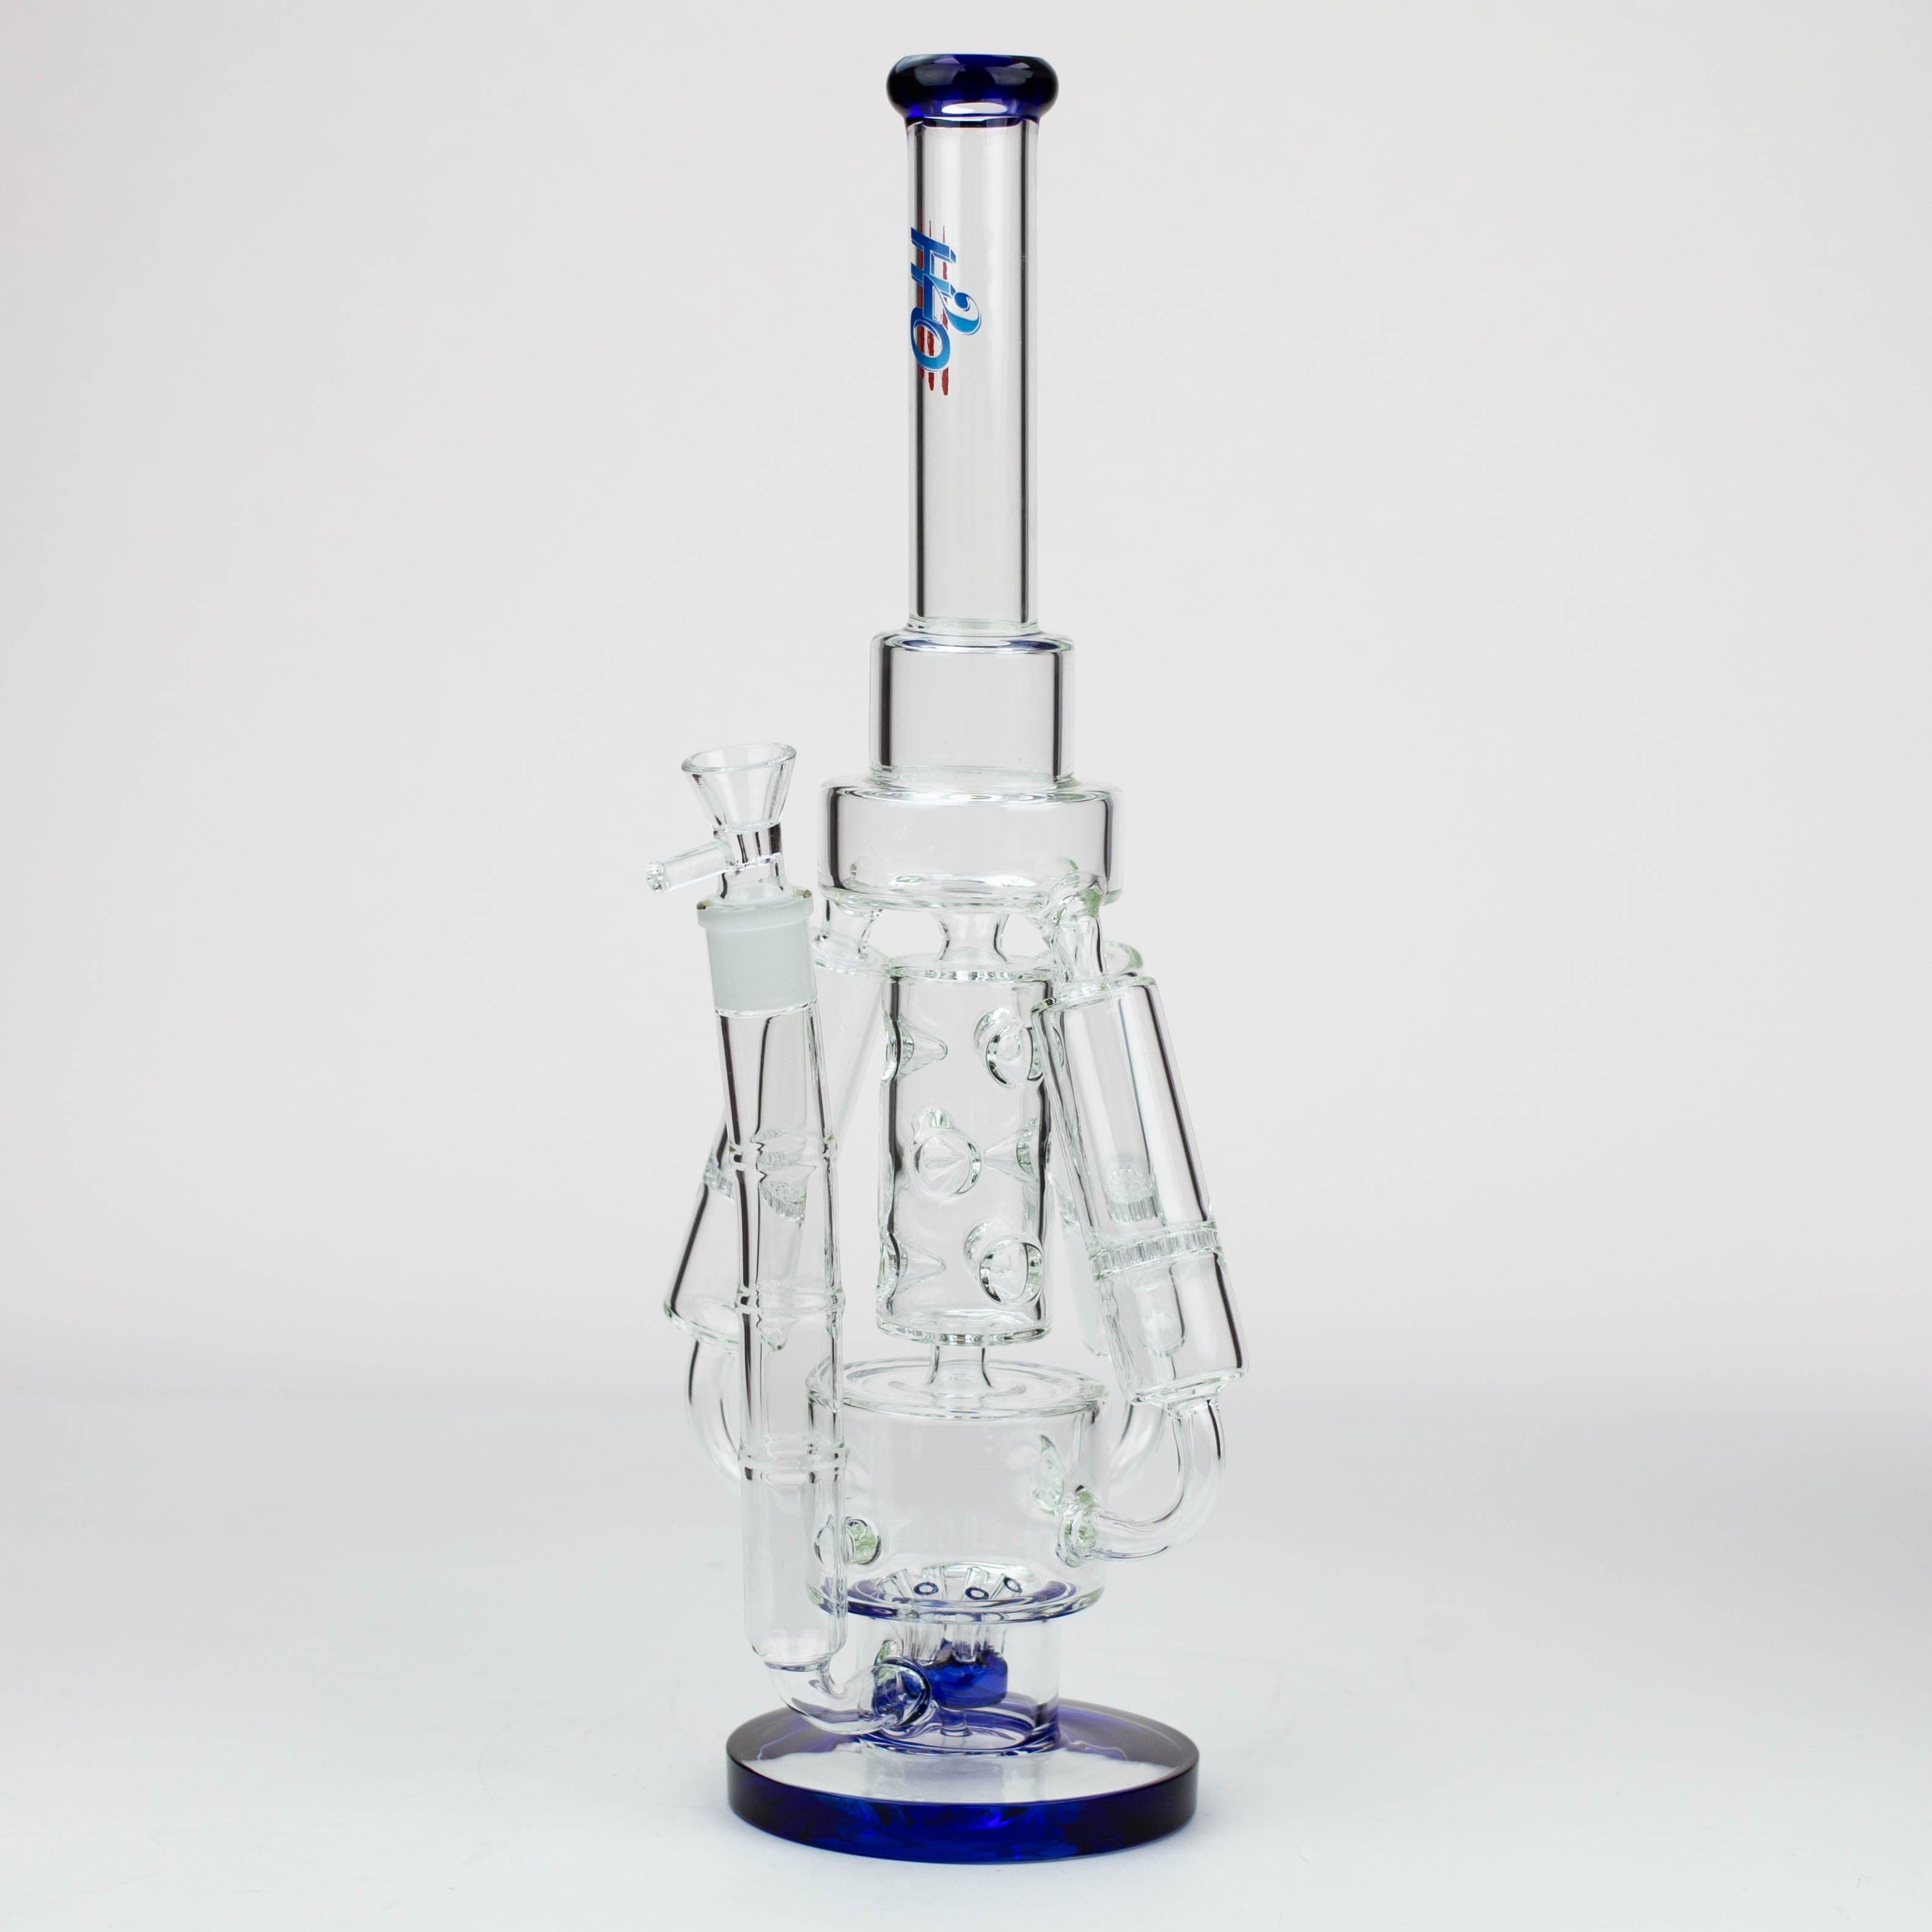 H2O Three Honeycomb silnders glass water recycle pipes 17"_6